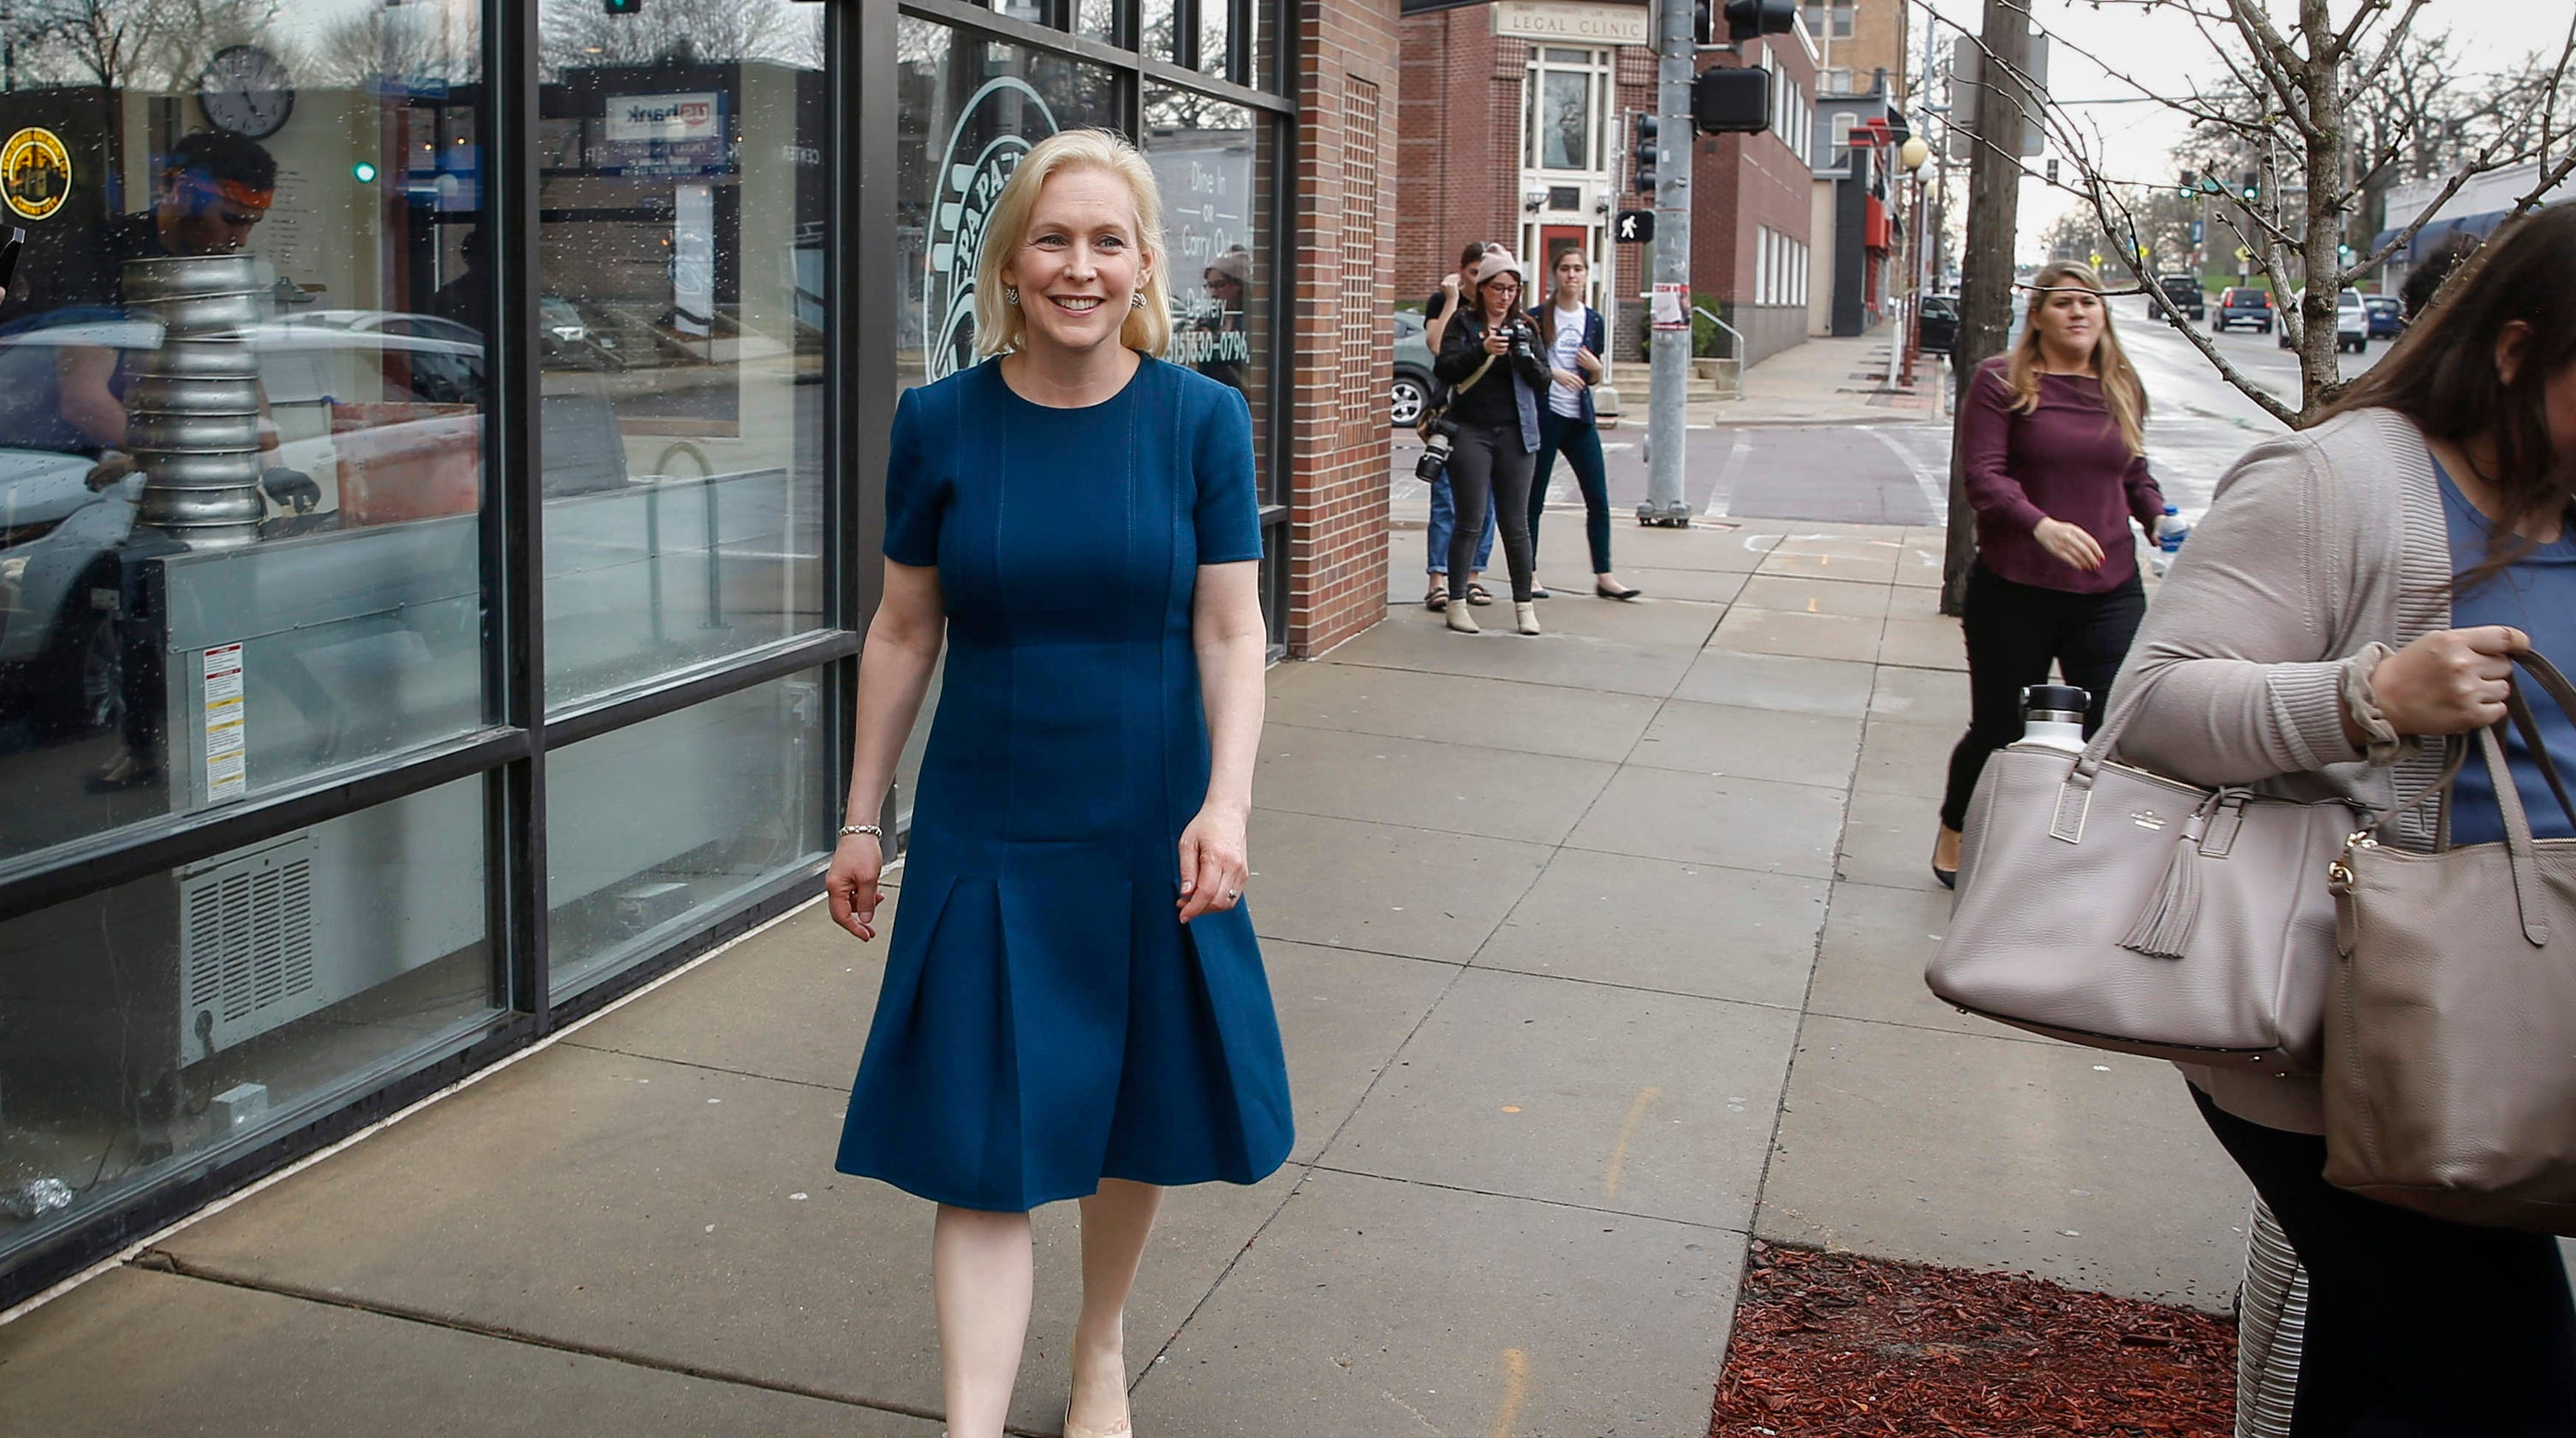 2020 Iowa caucus: Presidential candidate Gillibrand arm-wrestles for donations3009 x 1680